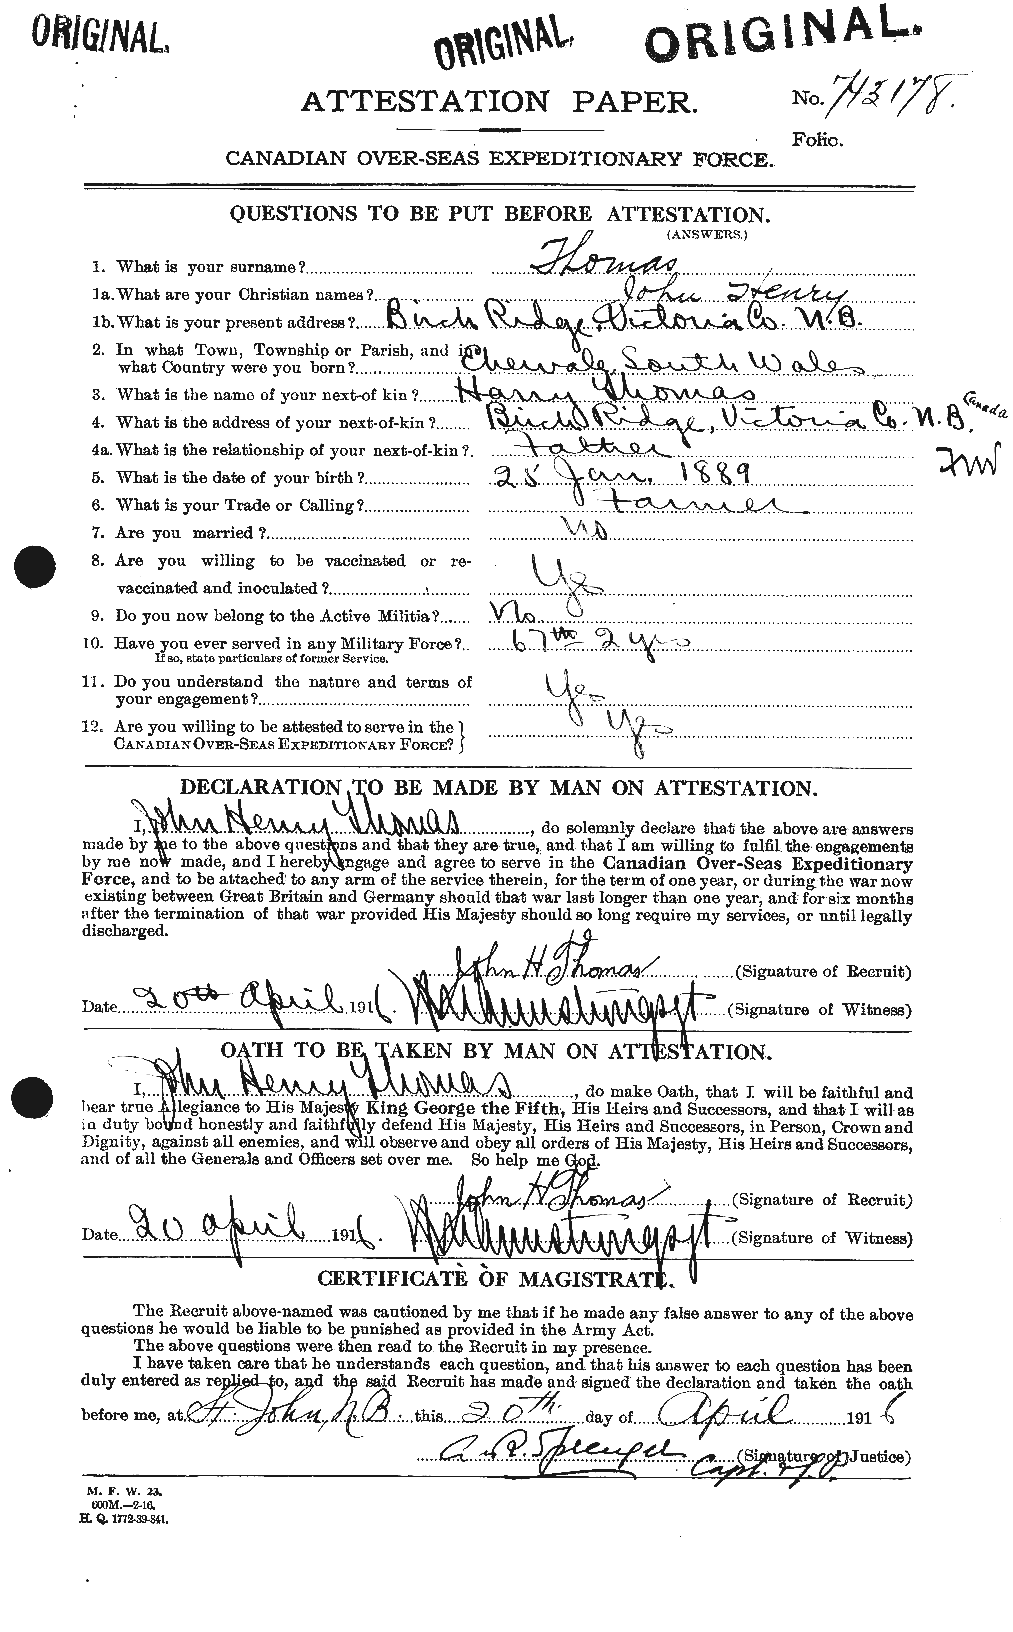 Personnel Records of the First World War - CEF 632448a